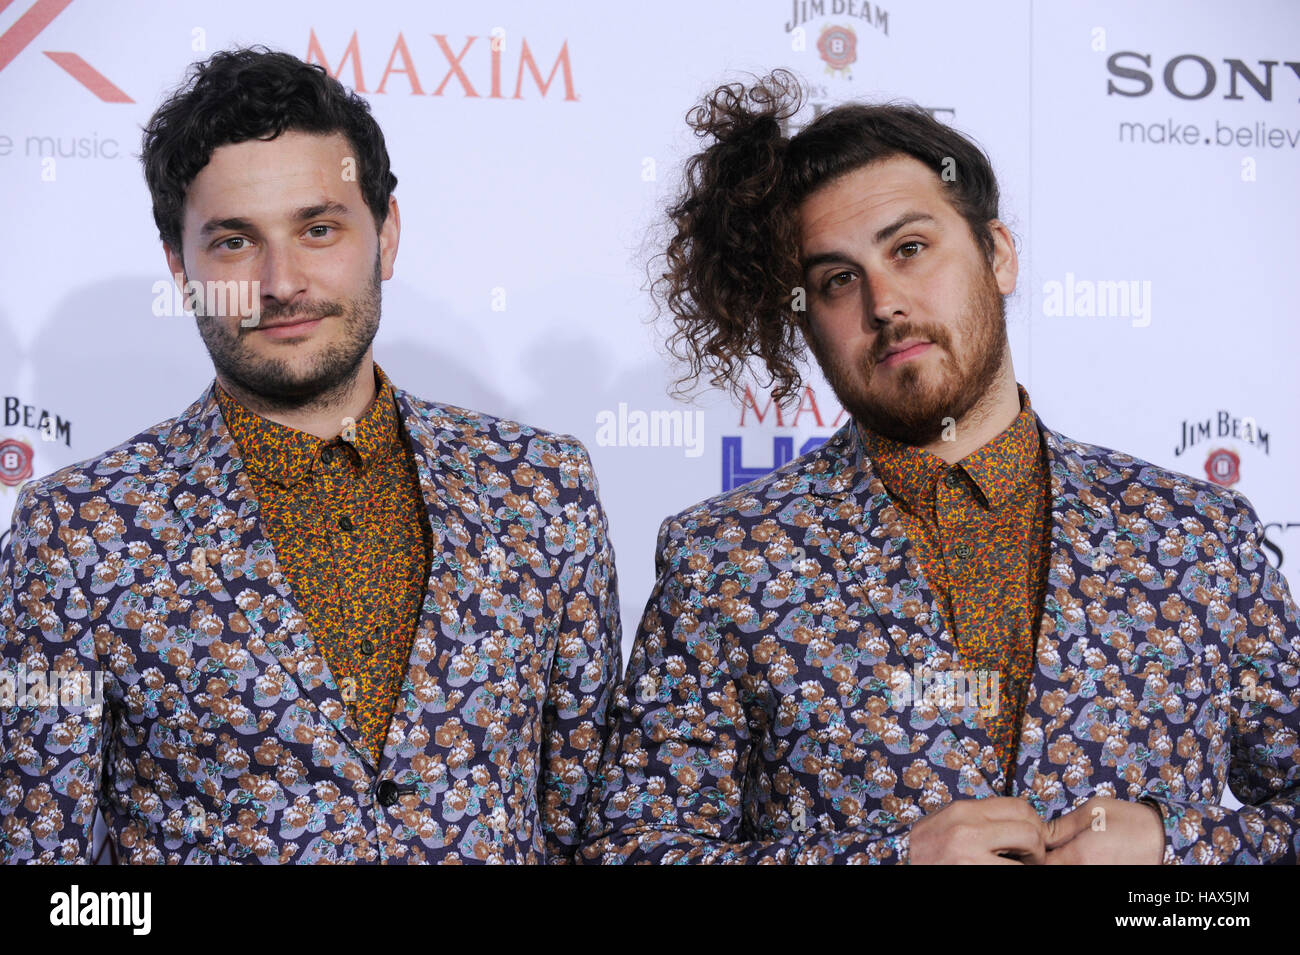 Music group Dale Earnhardt Jr. Jr. attends the Maxim 2013 Hot 100 Annual Party held at Vanguard on May 15, 2013 in Hollywood, California. Stock Photo